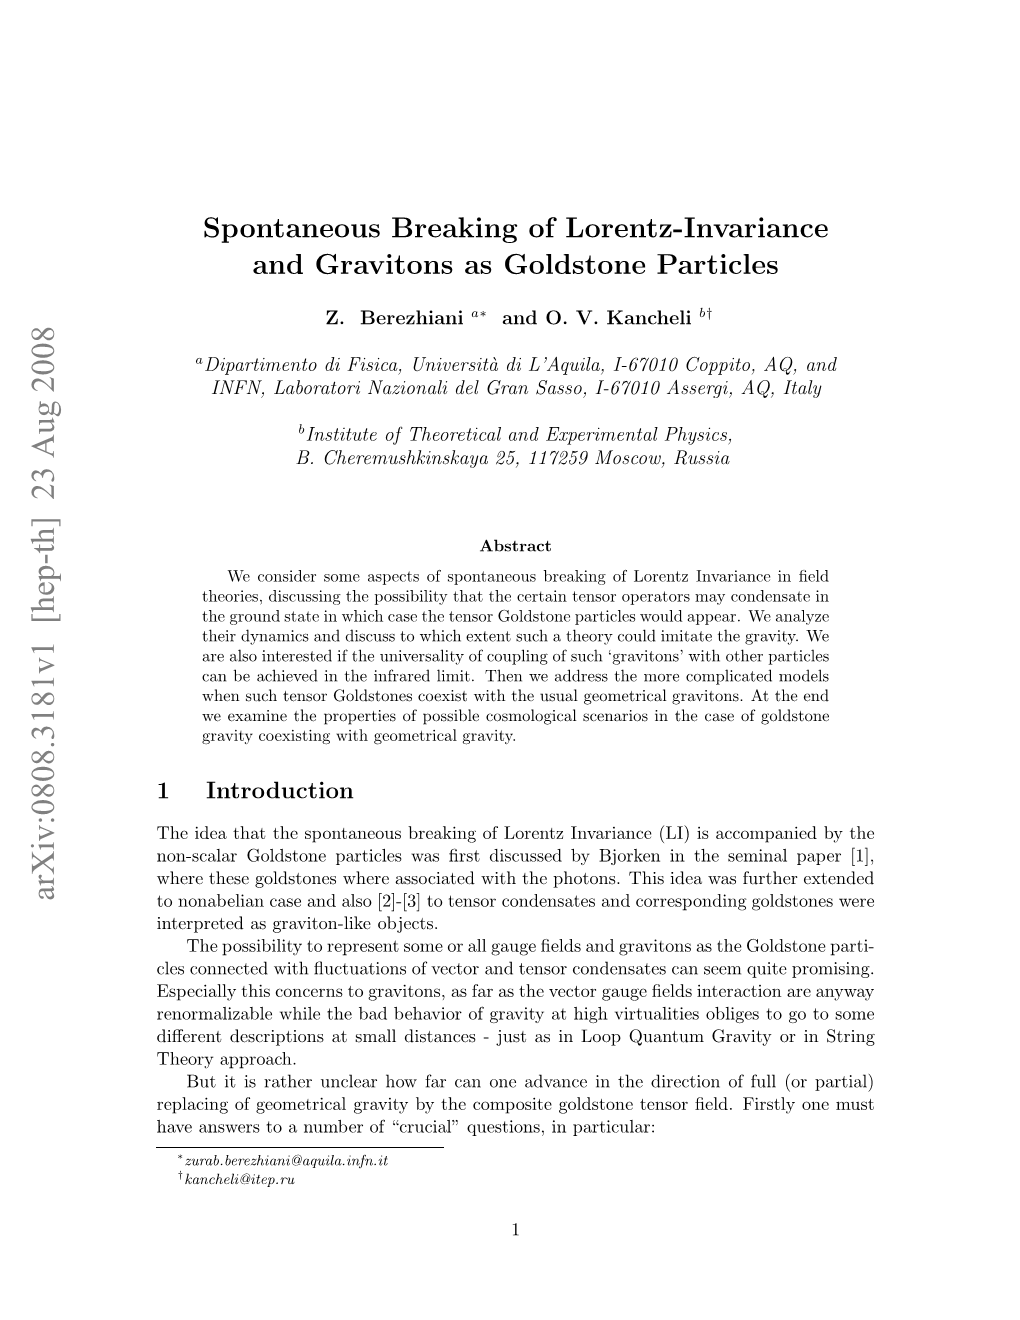 Spontaneous Breaking of Lorentz-Invariance and Gravitons